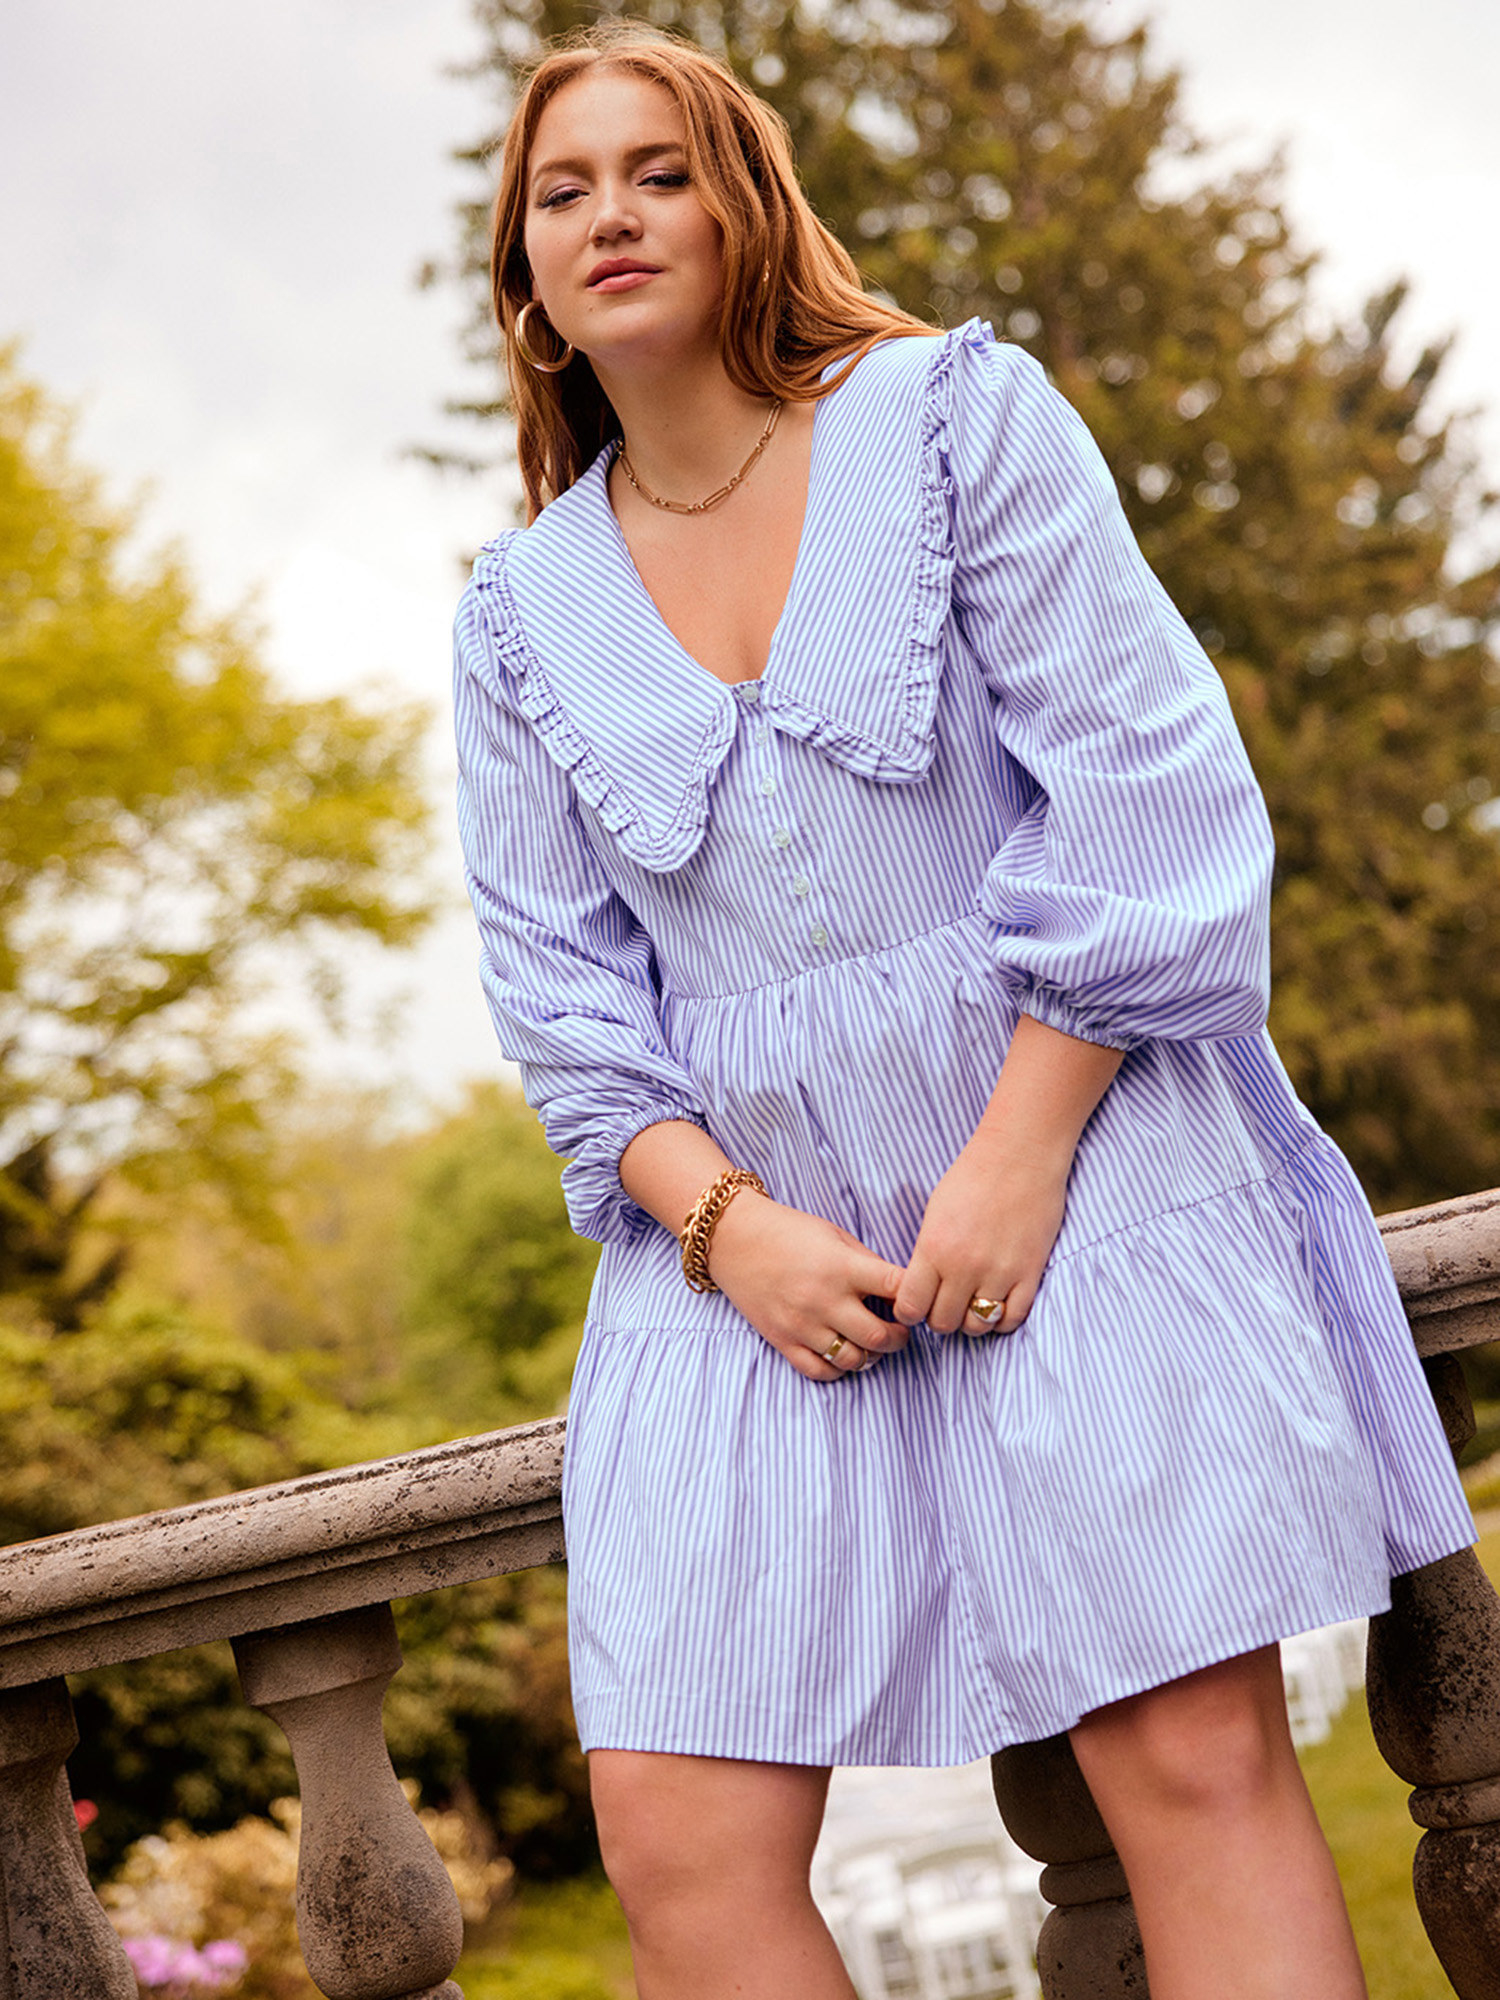 A model wearing a blue and white dress